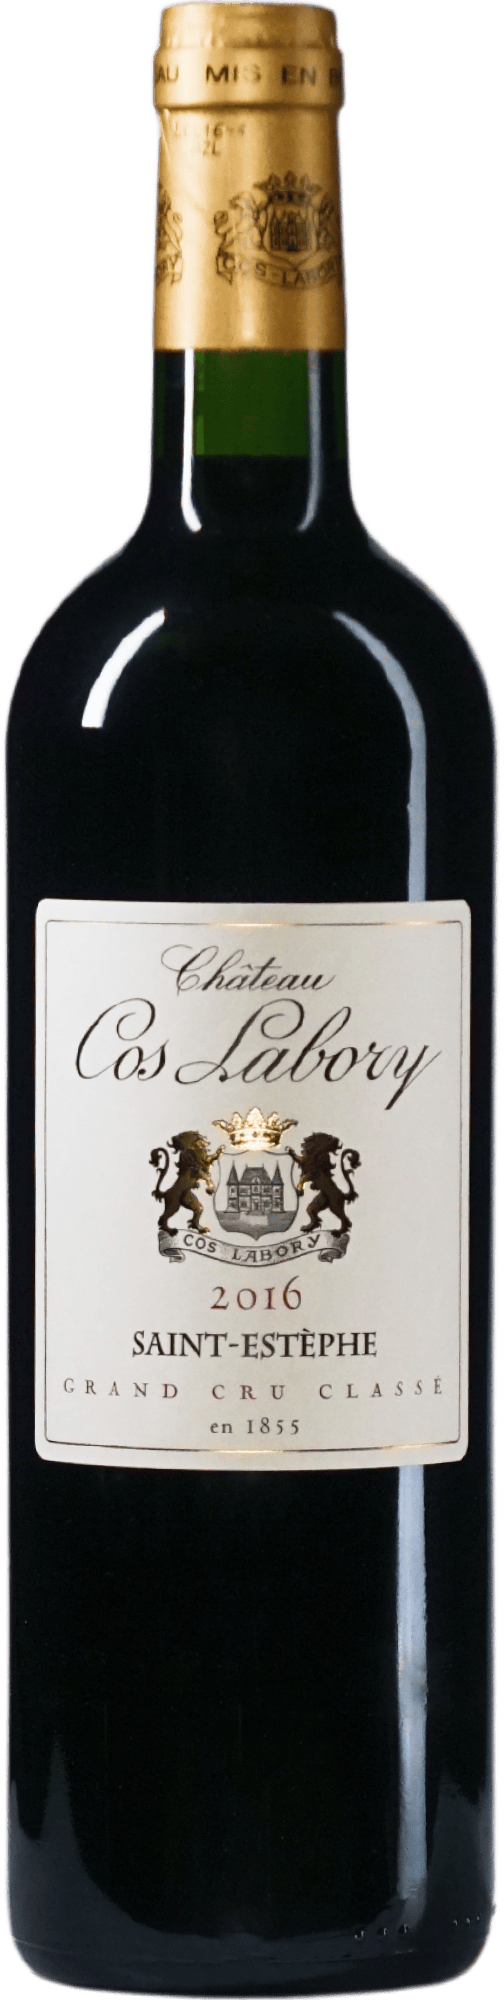 Chateau Cos Labory